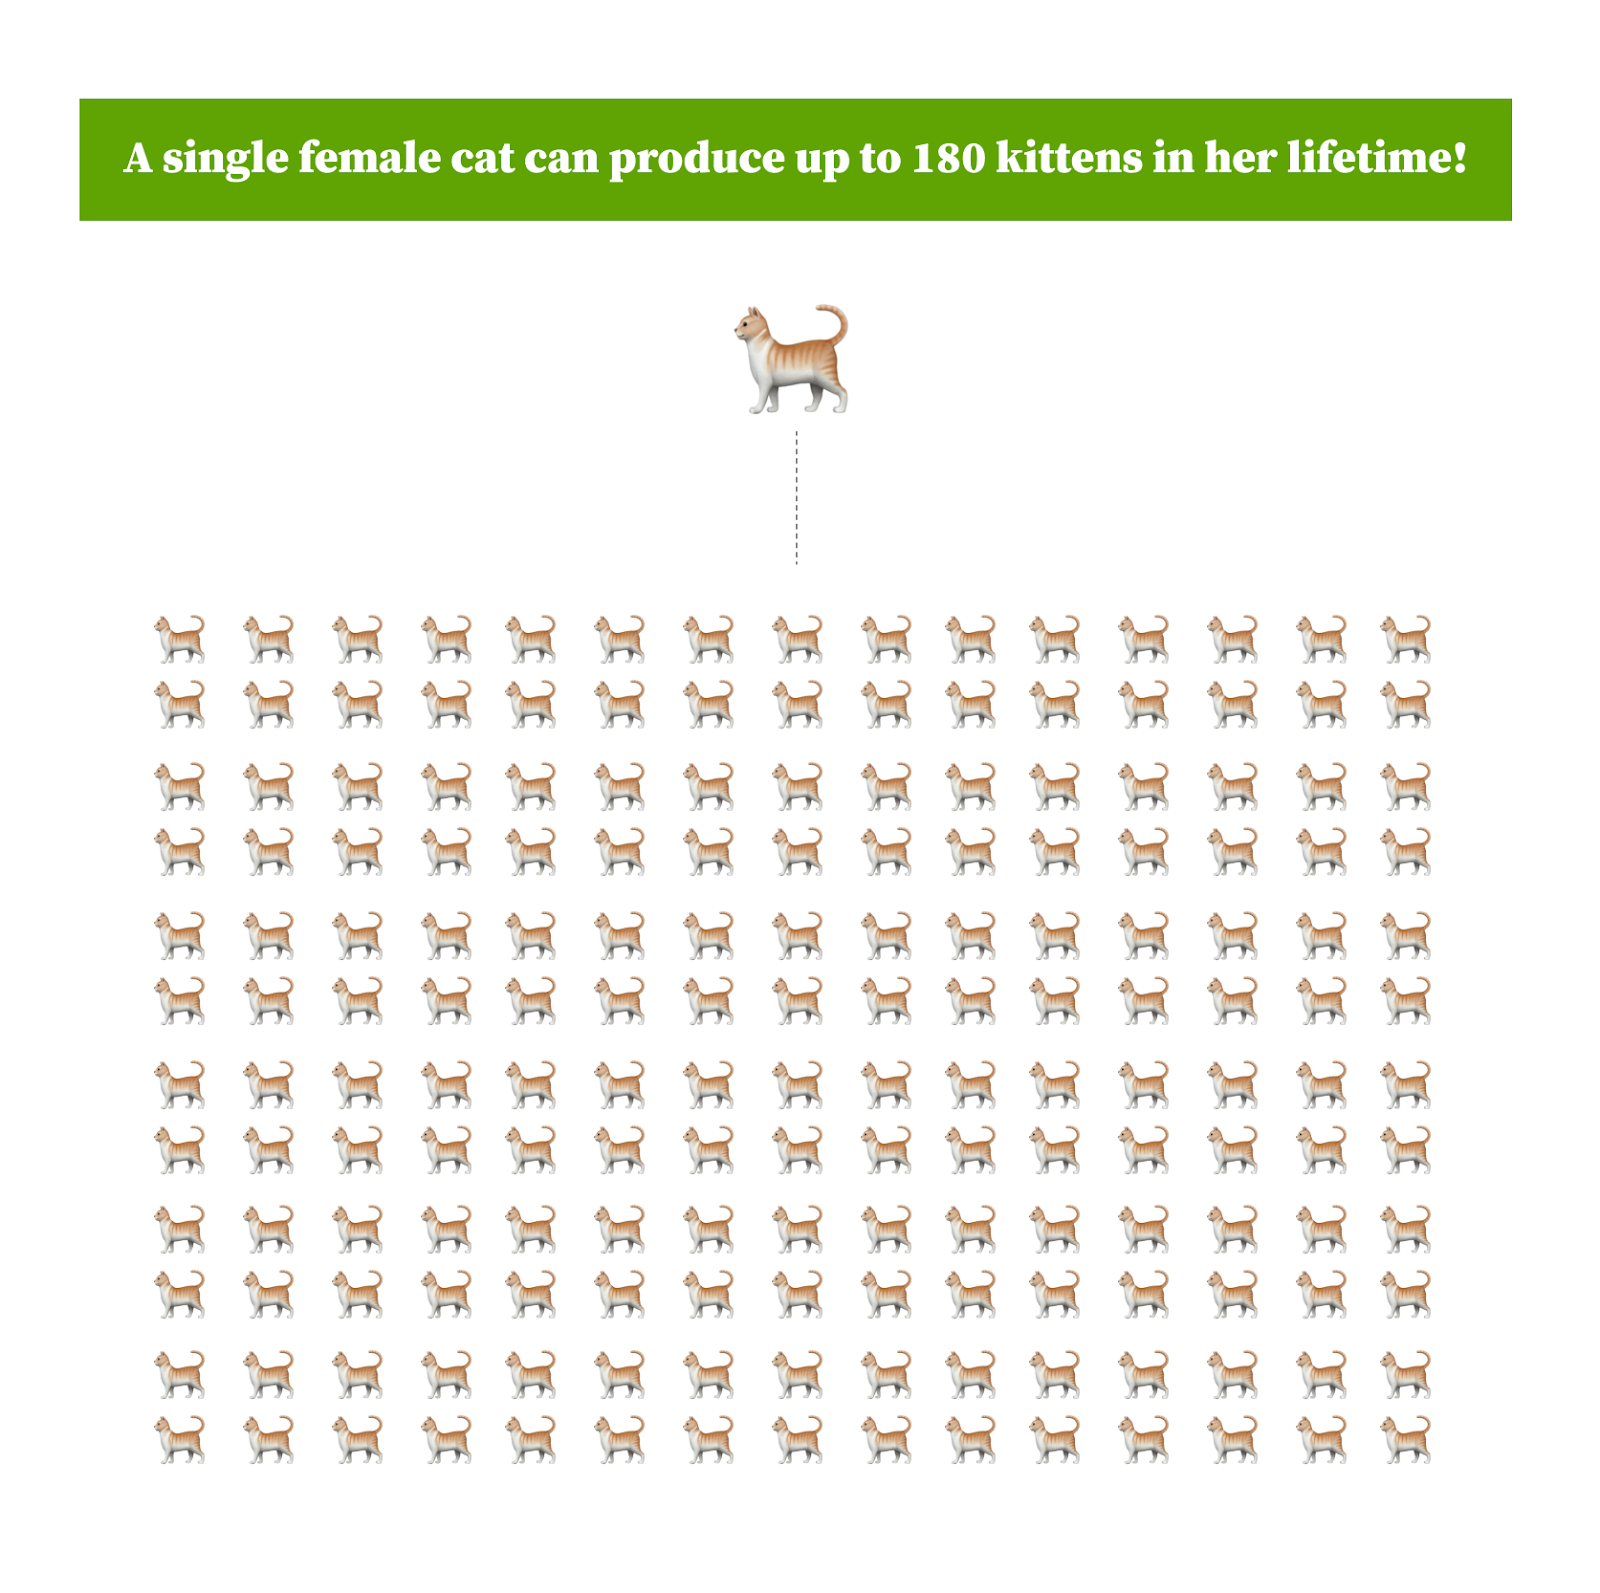 a graphic showing that a female cat can produce up to 180 kittens in her lifetime